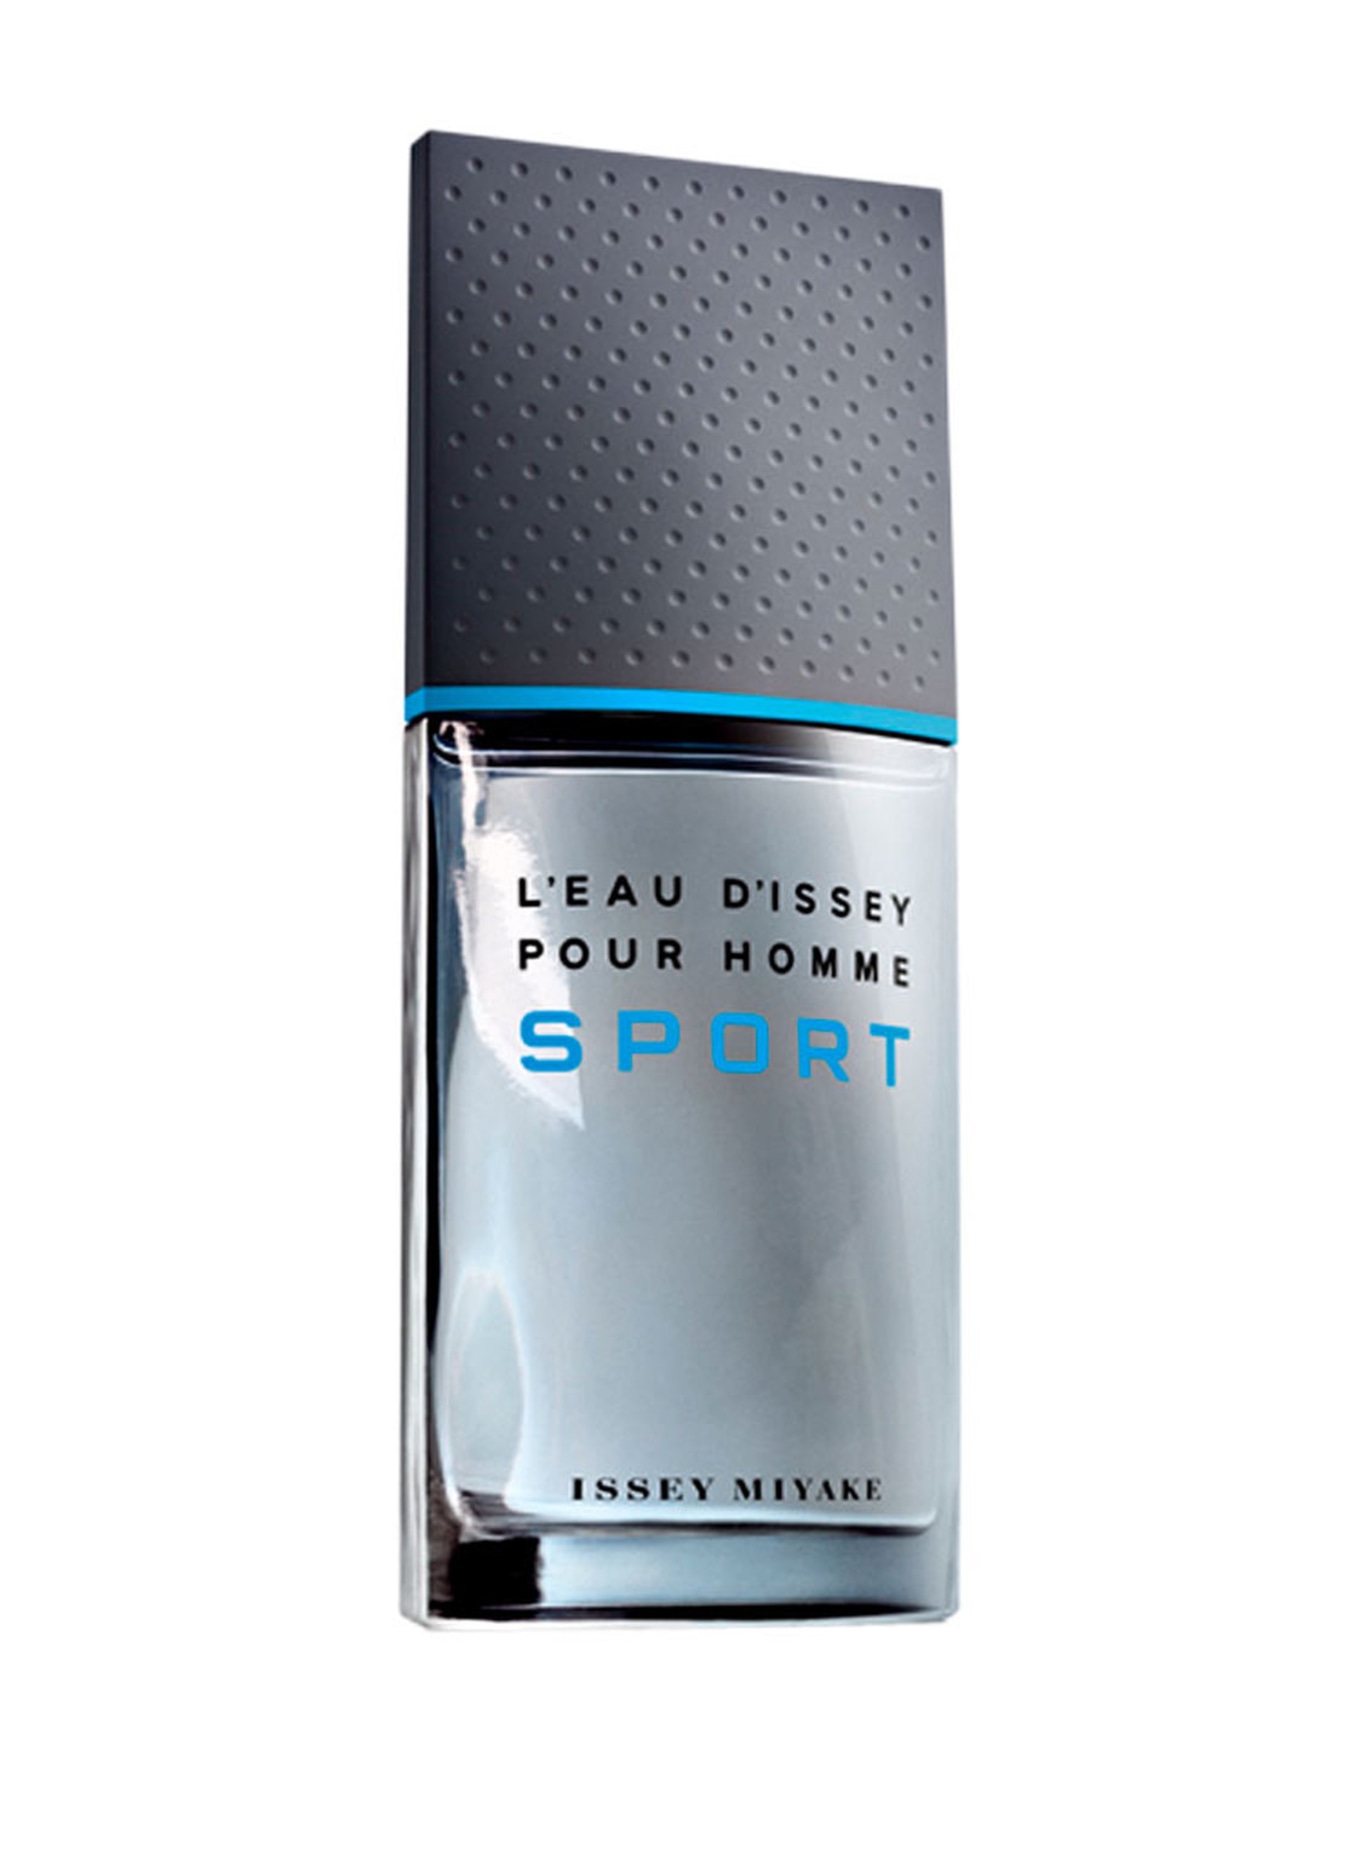 ISSEY MIYAKE L'EAU D'ISSEY POUR HOMME SPORT (Obrazek 1)